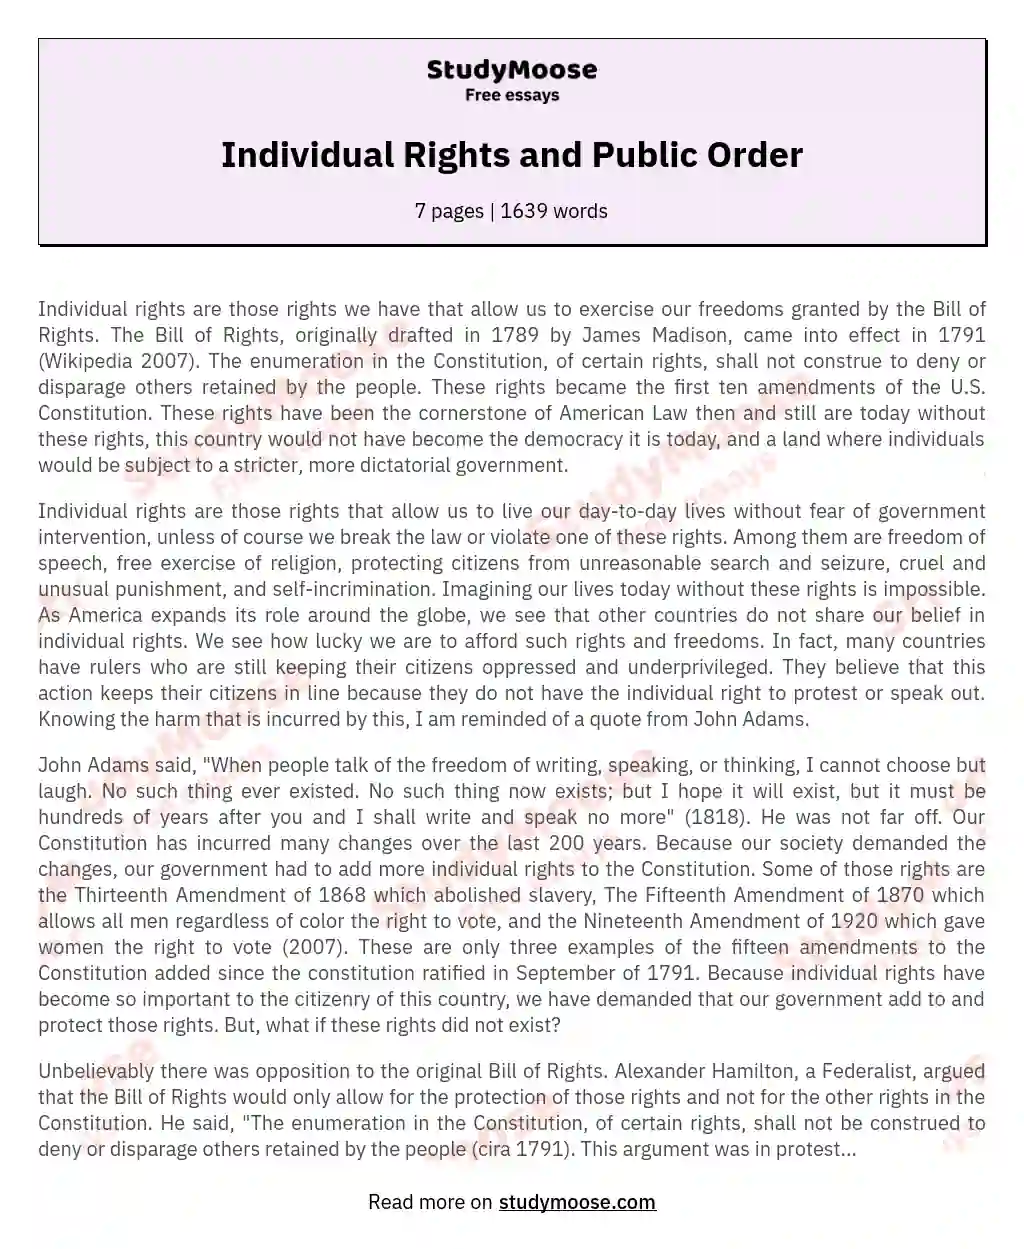 Individual Rights and Public Order